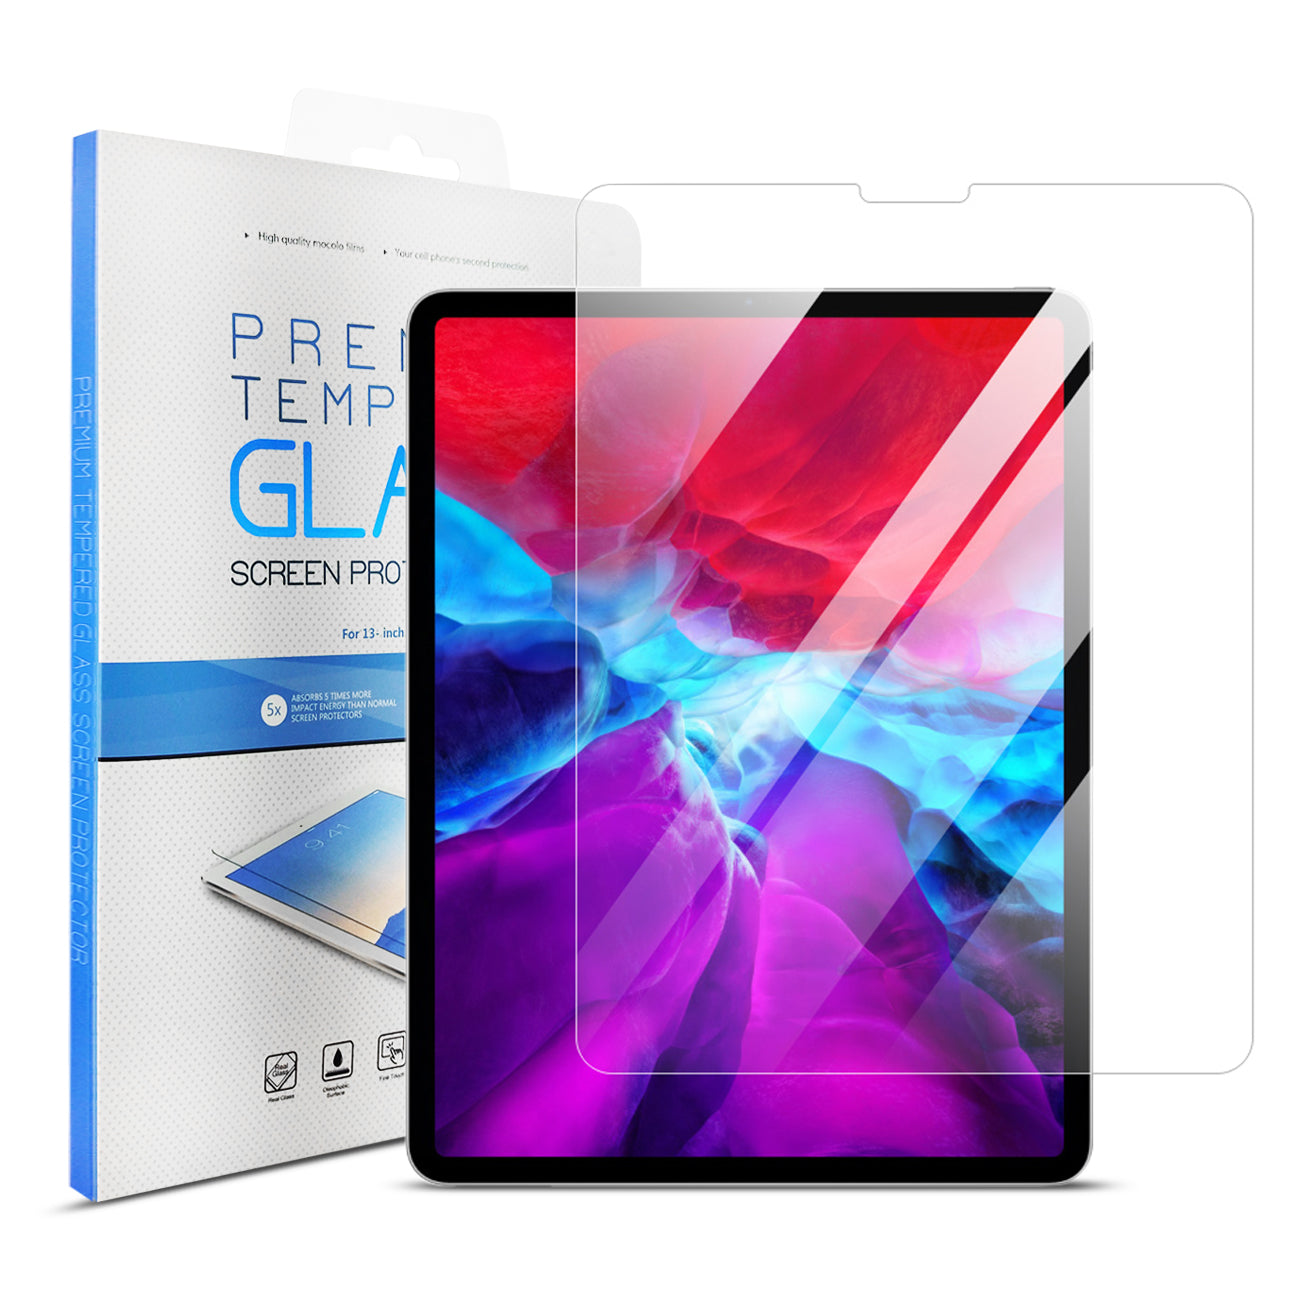 Screen Protector For iPad Pro 12.9" (2018/2020) (A1876/A2014/A1895/A1983)